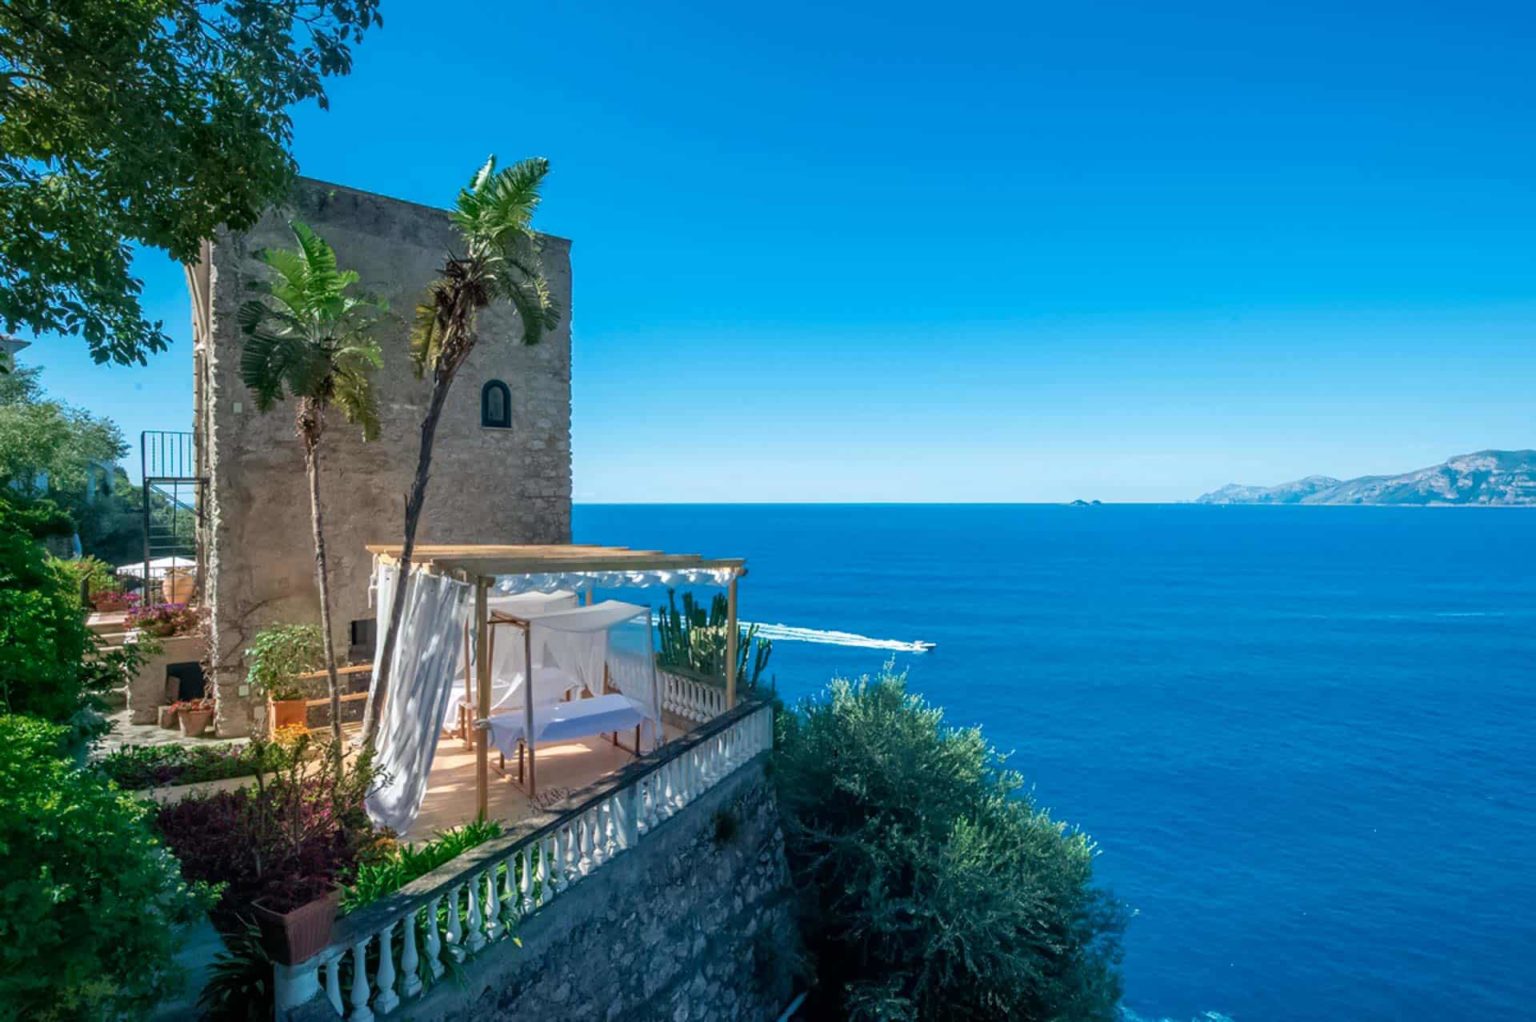 Breathtaking view from the balcony of Villa Lilly overlooking Positano to Capri.